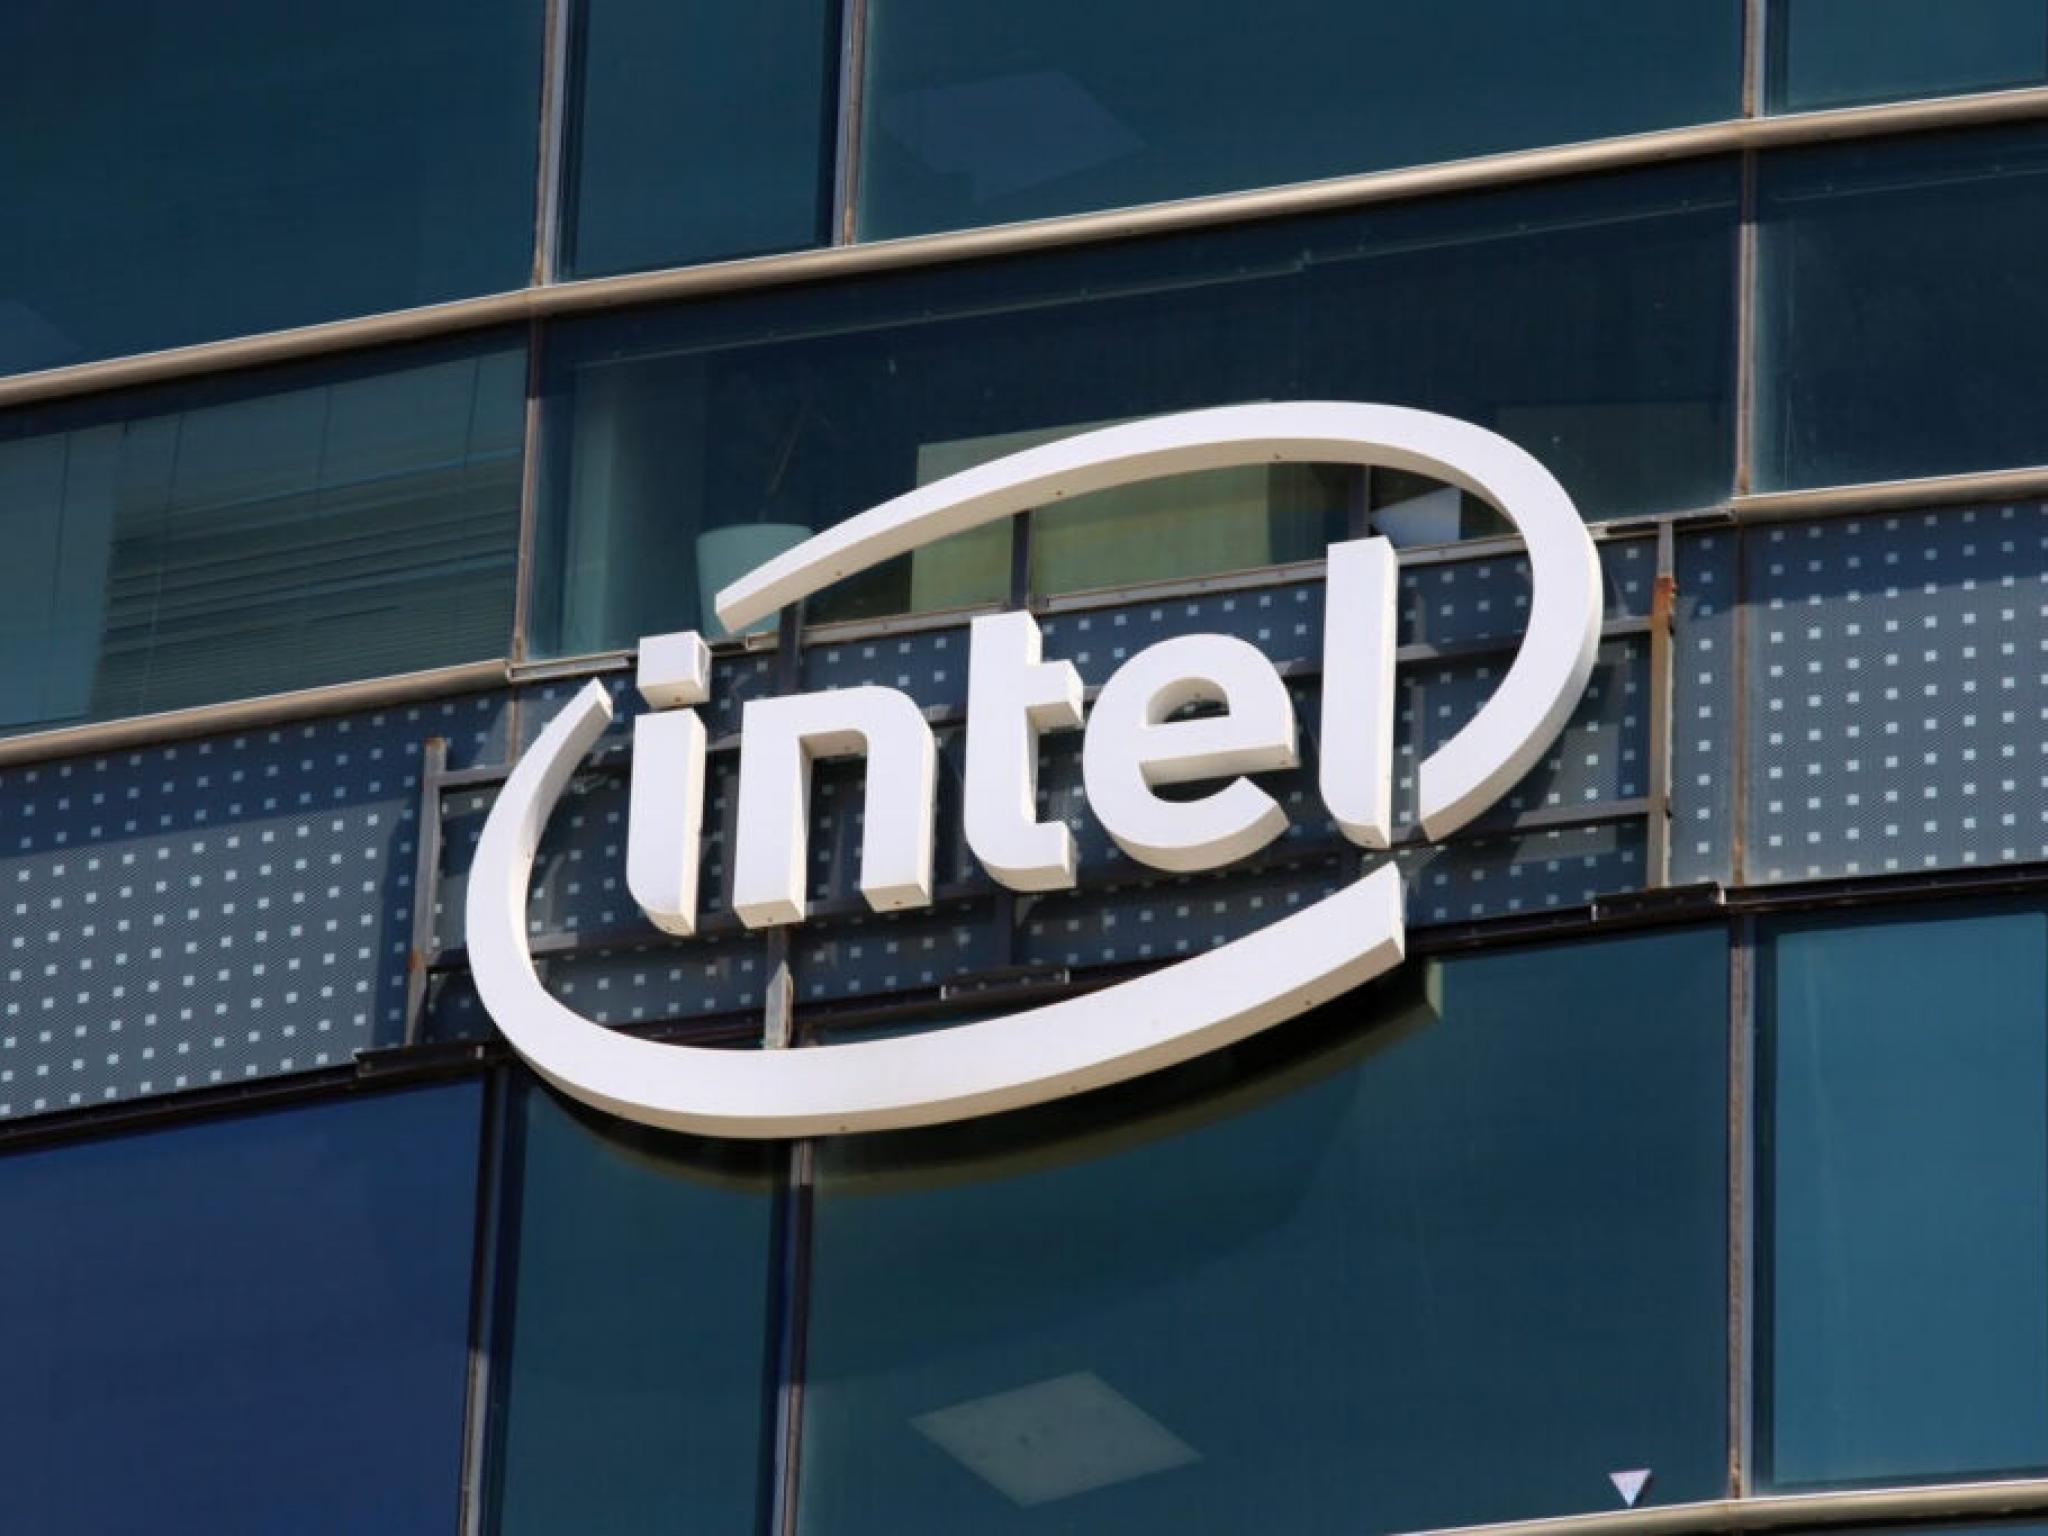  intel-shares-rise-in-pre-market-as-nvidia-amd-crack-after-cpu-maker-announces-new-ai-chip-to-take-on-rivals 